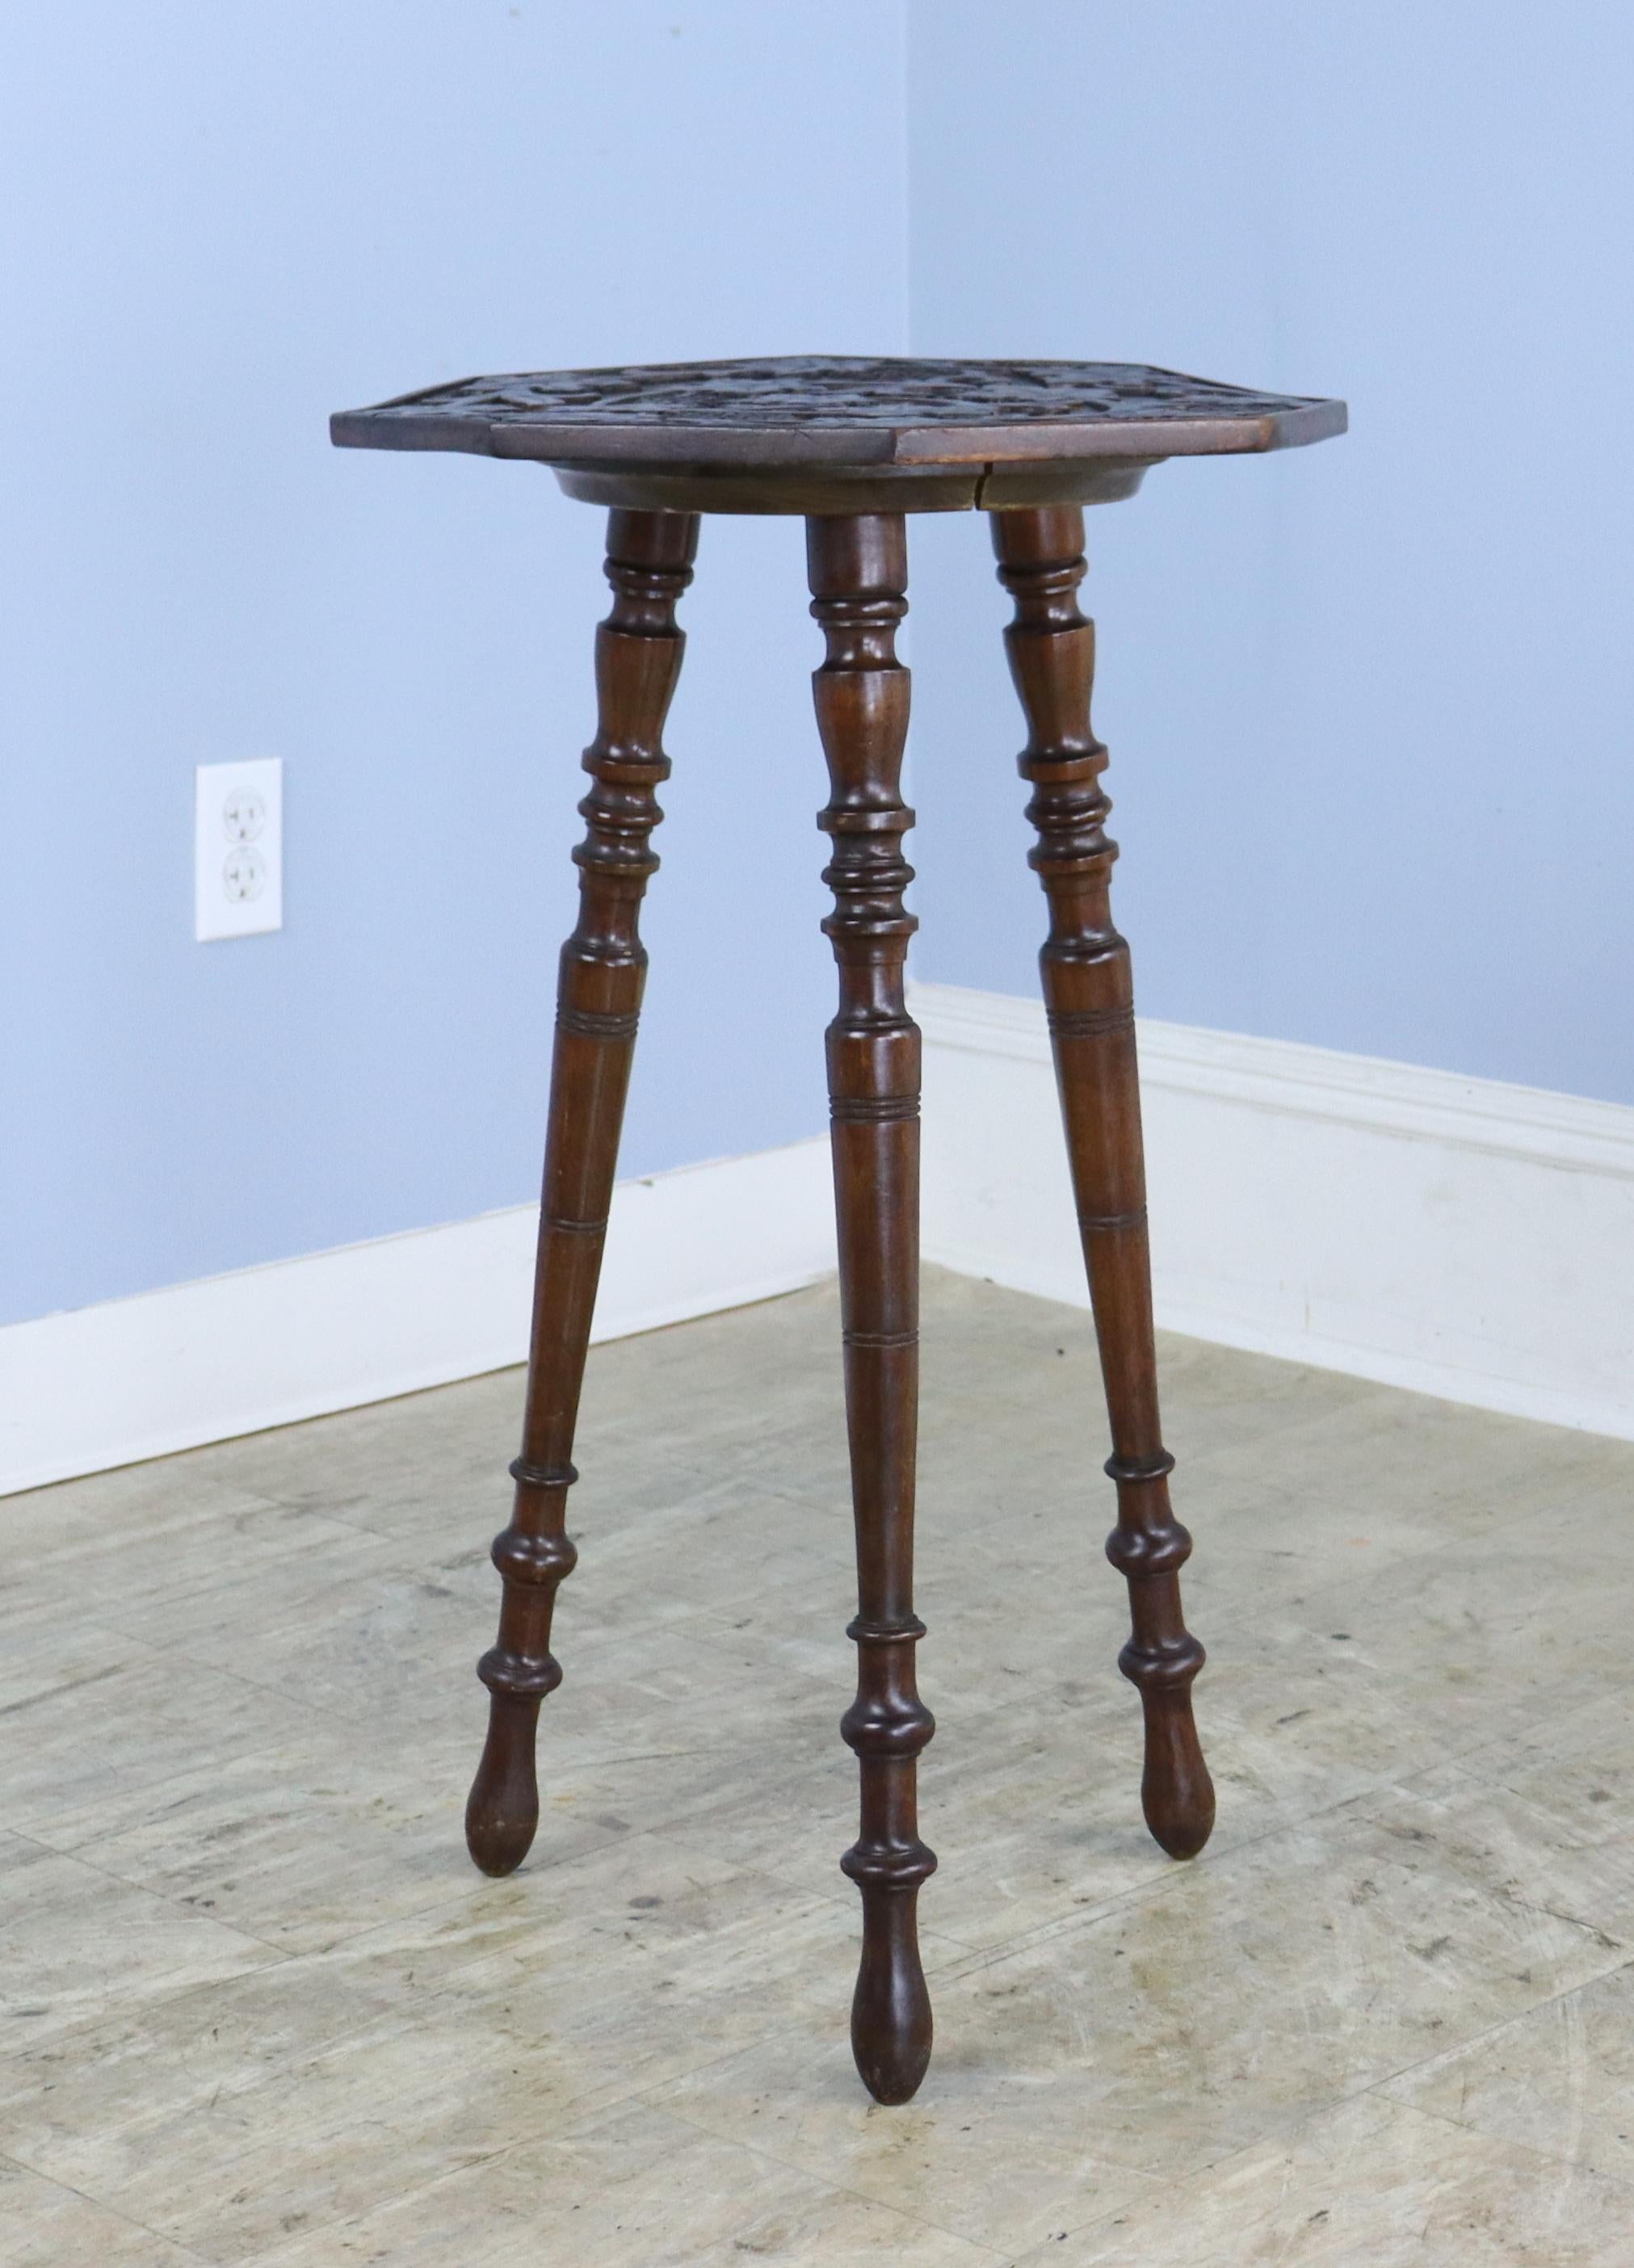 A whisical octagonal cricket, side or lamp table from England's Arts & Crafts period.  The top has a fancifully carved grape and vine motif, and the legs are nicely turned and steady.  no wobbles!